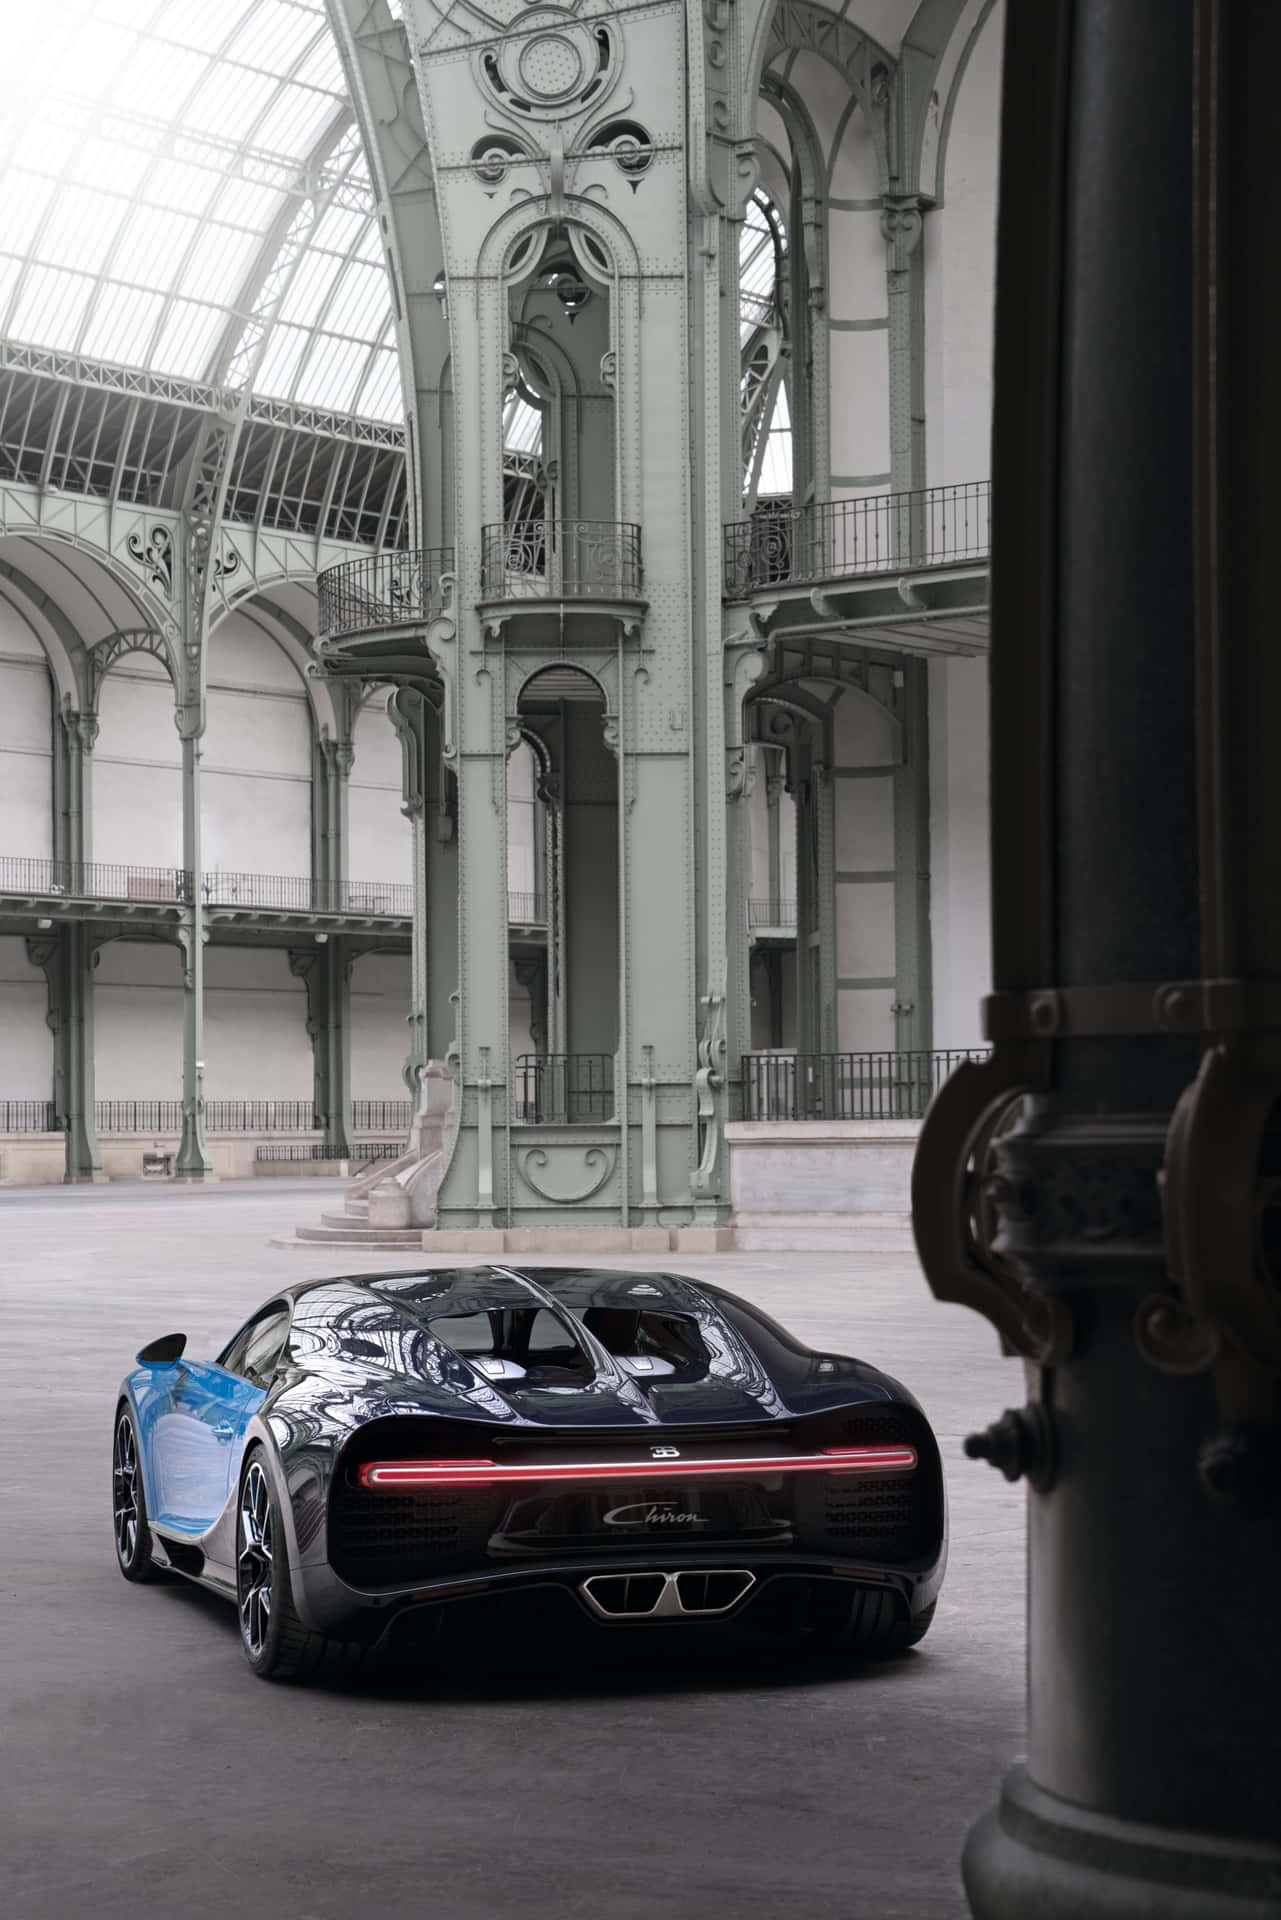 Embrace the Power of Technology with the Bugatti Phone Wallpaper